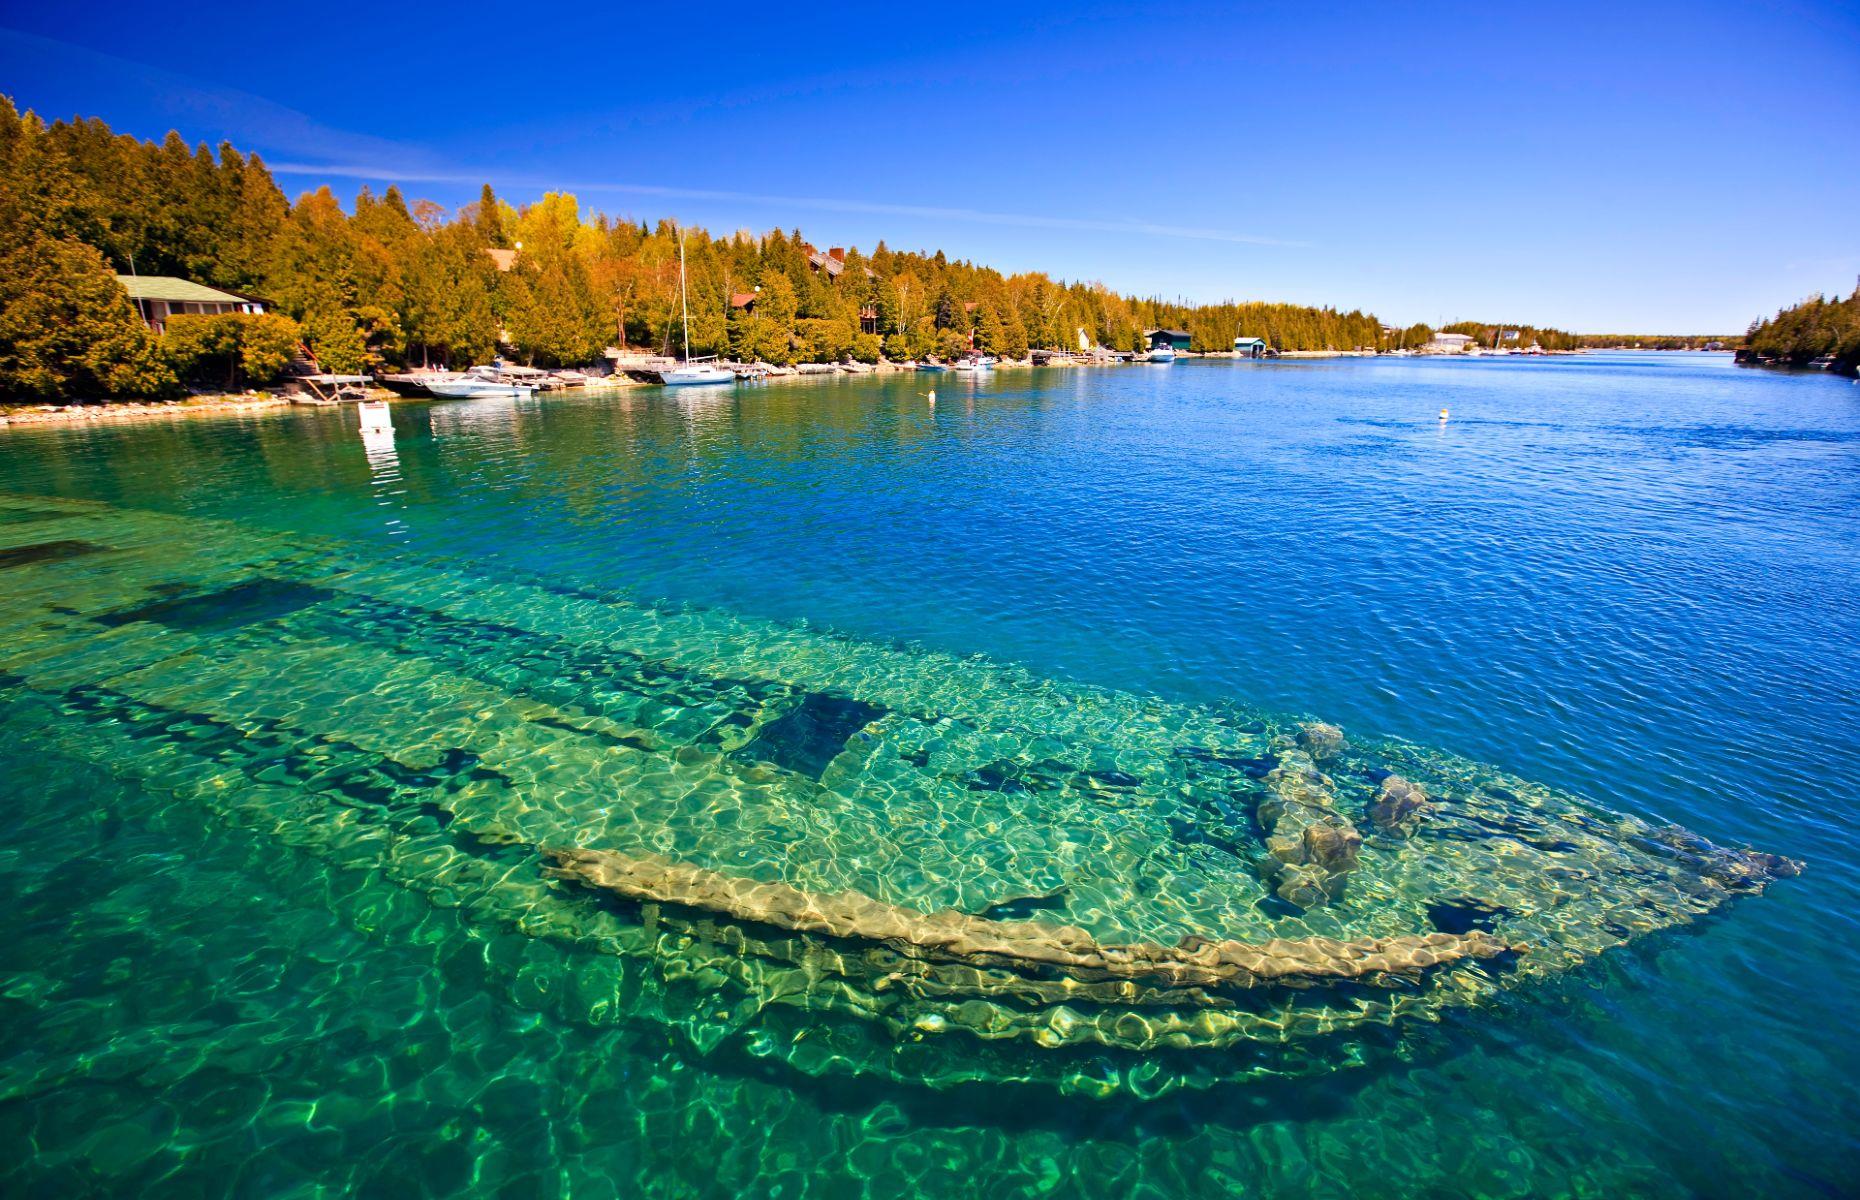 <p>Lake Huron might be entirely inland, but the extraordinary number of shipwrecks at Fathom Five suggest it was just as treacherous for skippers as anywhere on the high seas. Maritime archaeologists have swept away the silt to uncover 24 sunken vessels, from the Avalon Voyager II – in water so shallow it can be viewed by snorkelers – to the 217-foot (66m) steamer Forest City. The area is famous for its scuba diving, but you can stay dry and see the wrecks too, since glass-bottom boat tours pass over the 19th-century ships Arabia and Sweepstakes.</p>